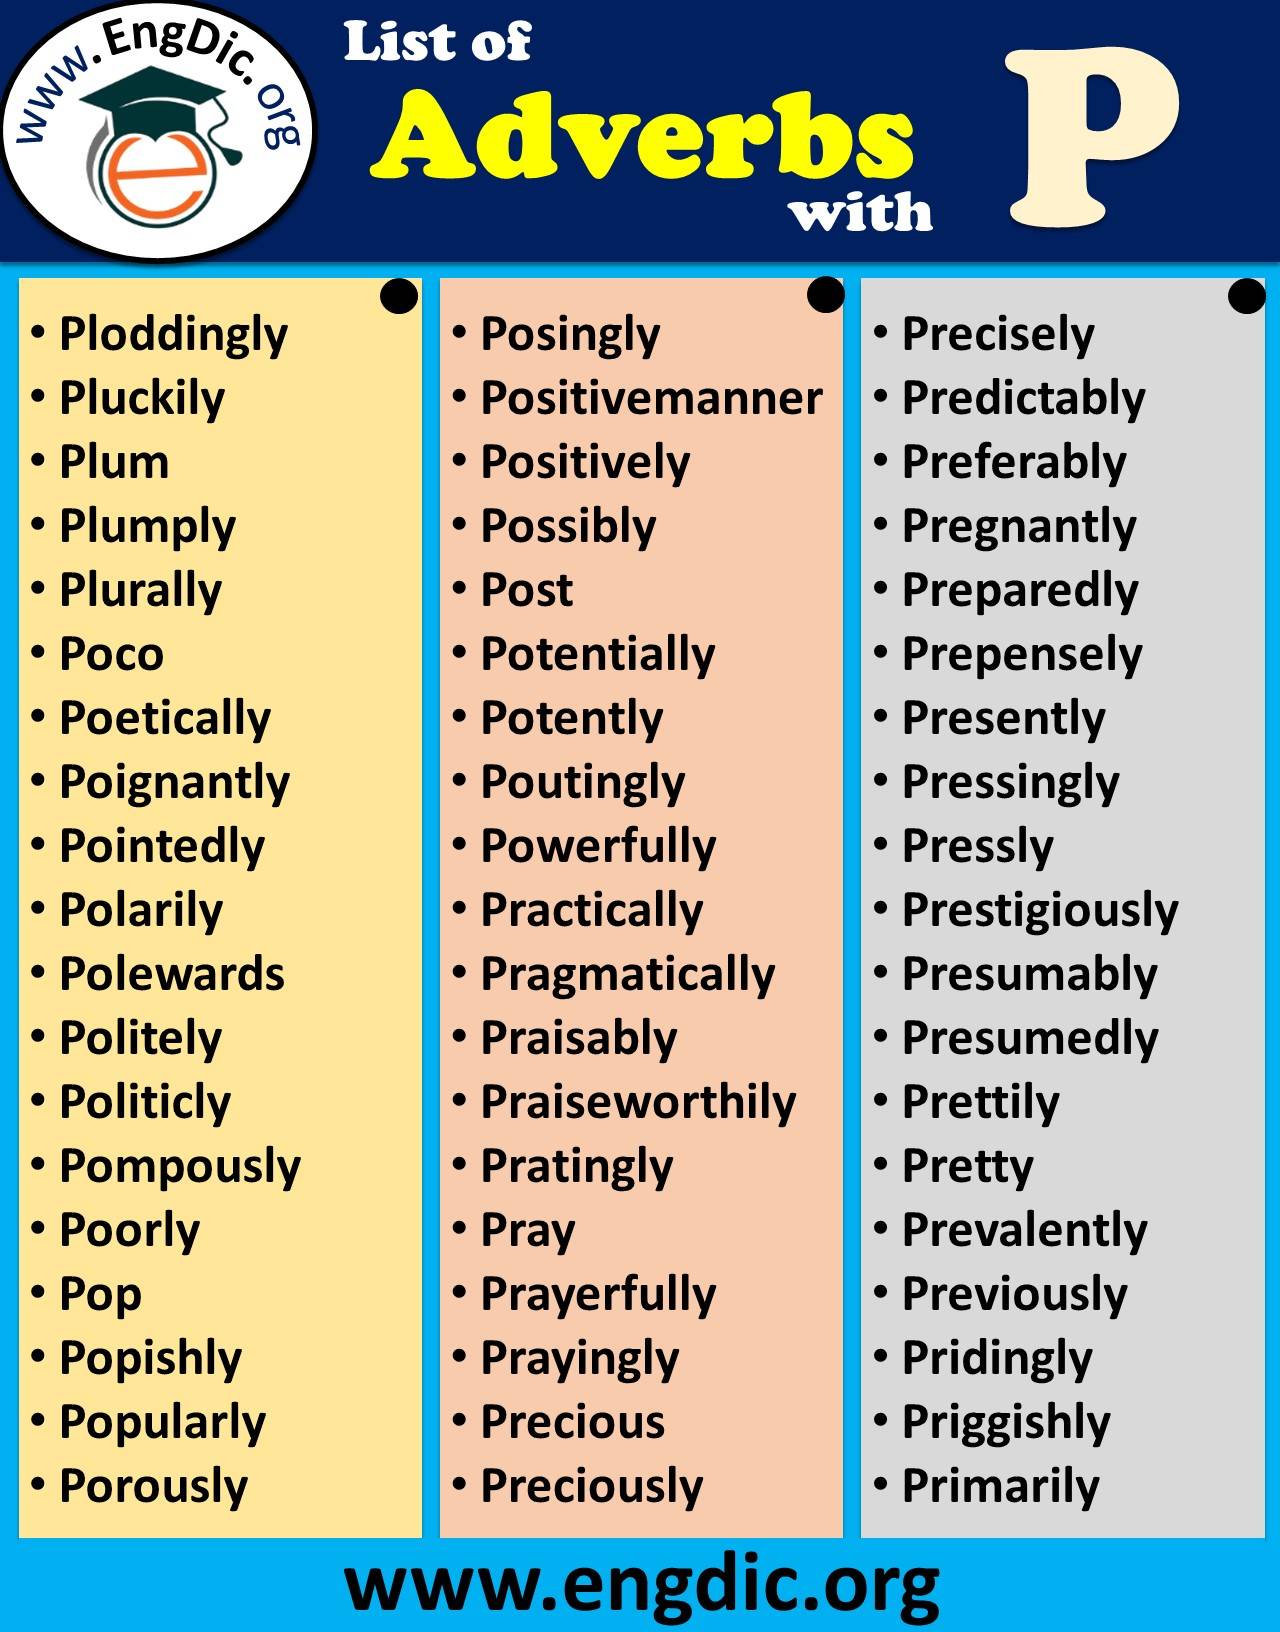 adverbs that start with p to describe a person